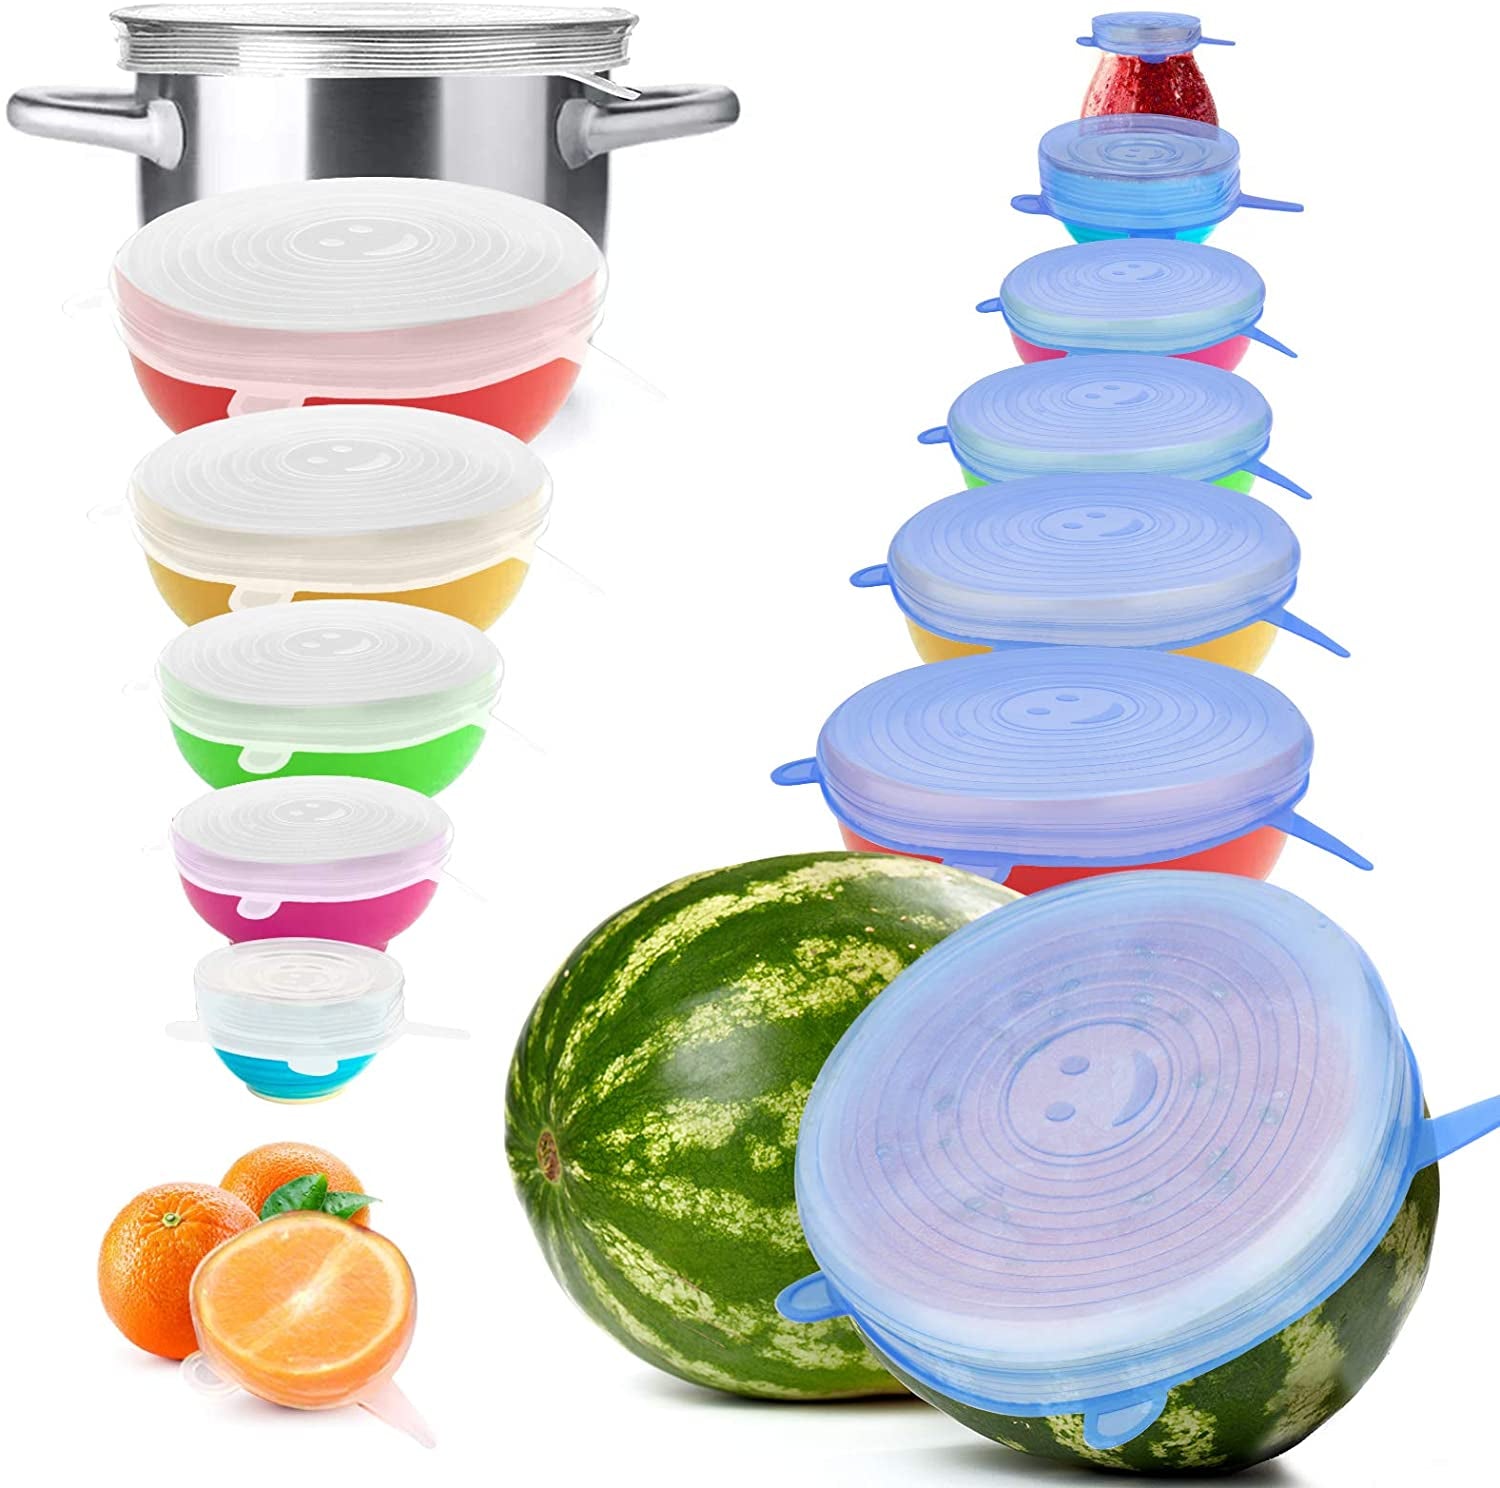 Reusable Premium Silicone Stretch and Seal Lids 14PCS for Food Storage, Flexible round Silicone Bowl Covers, 7 Different Sizes - Keep Food Fresh, by